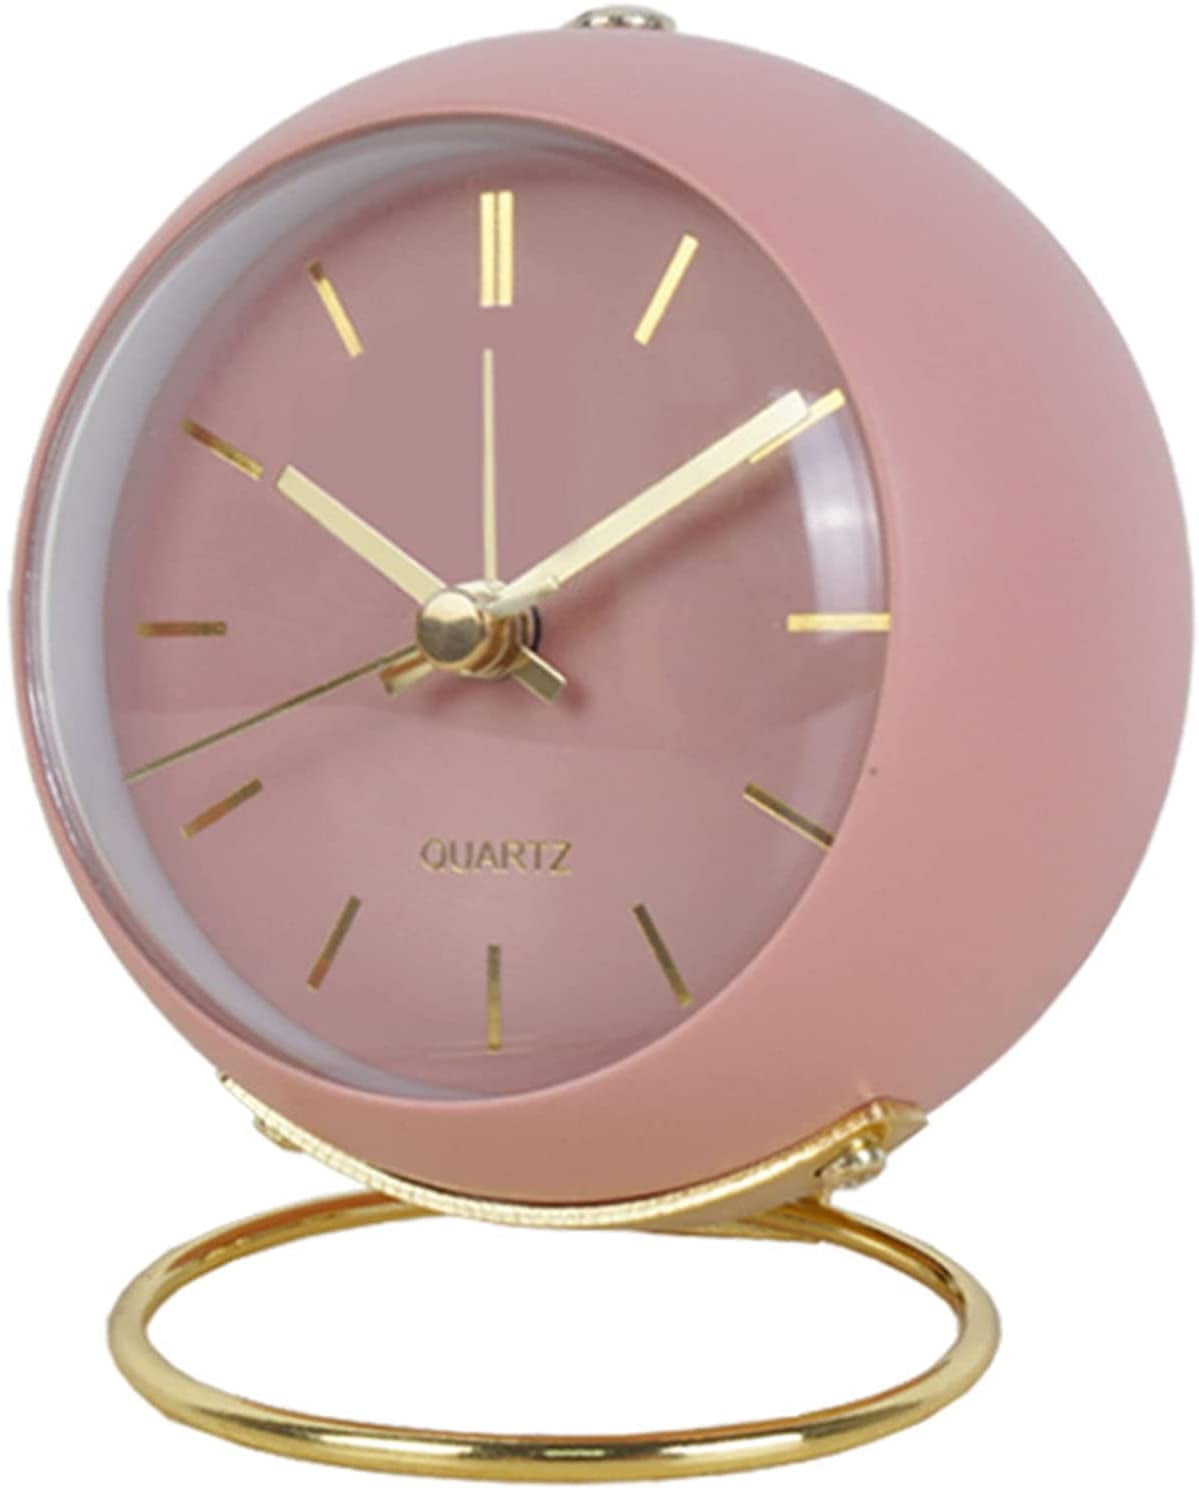 Wekity Small Silent Table Clocks,Classic Non-Ticking Nordic Simple 